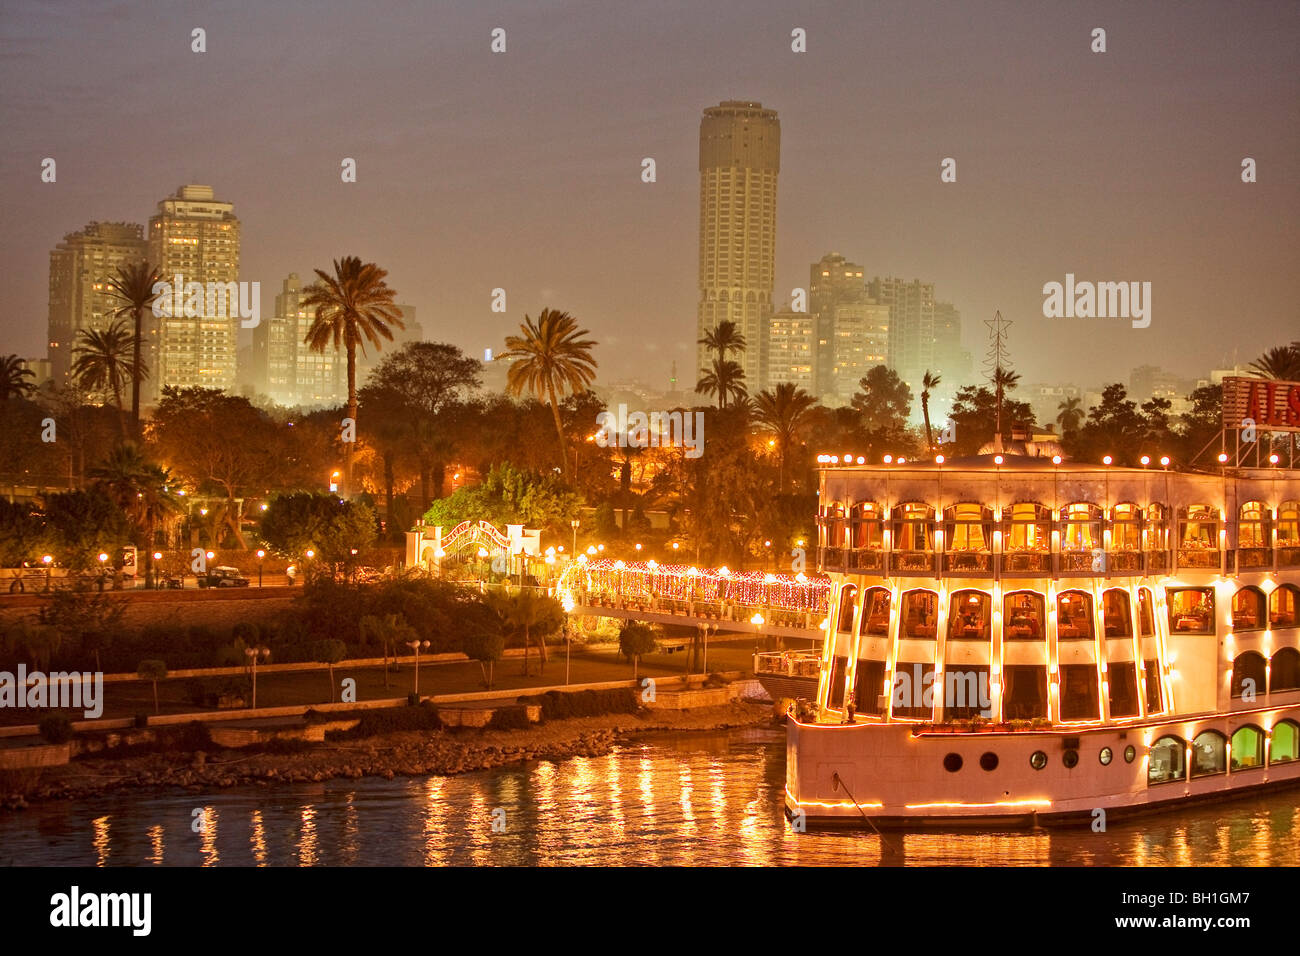 Illuminated ship on the Nile in front of palm trees and high rise buildings, Cairo, Egypt, Africa Stock Photo